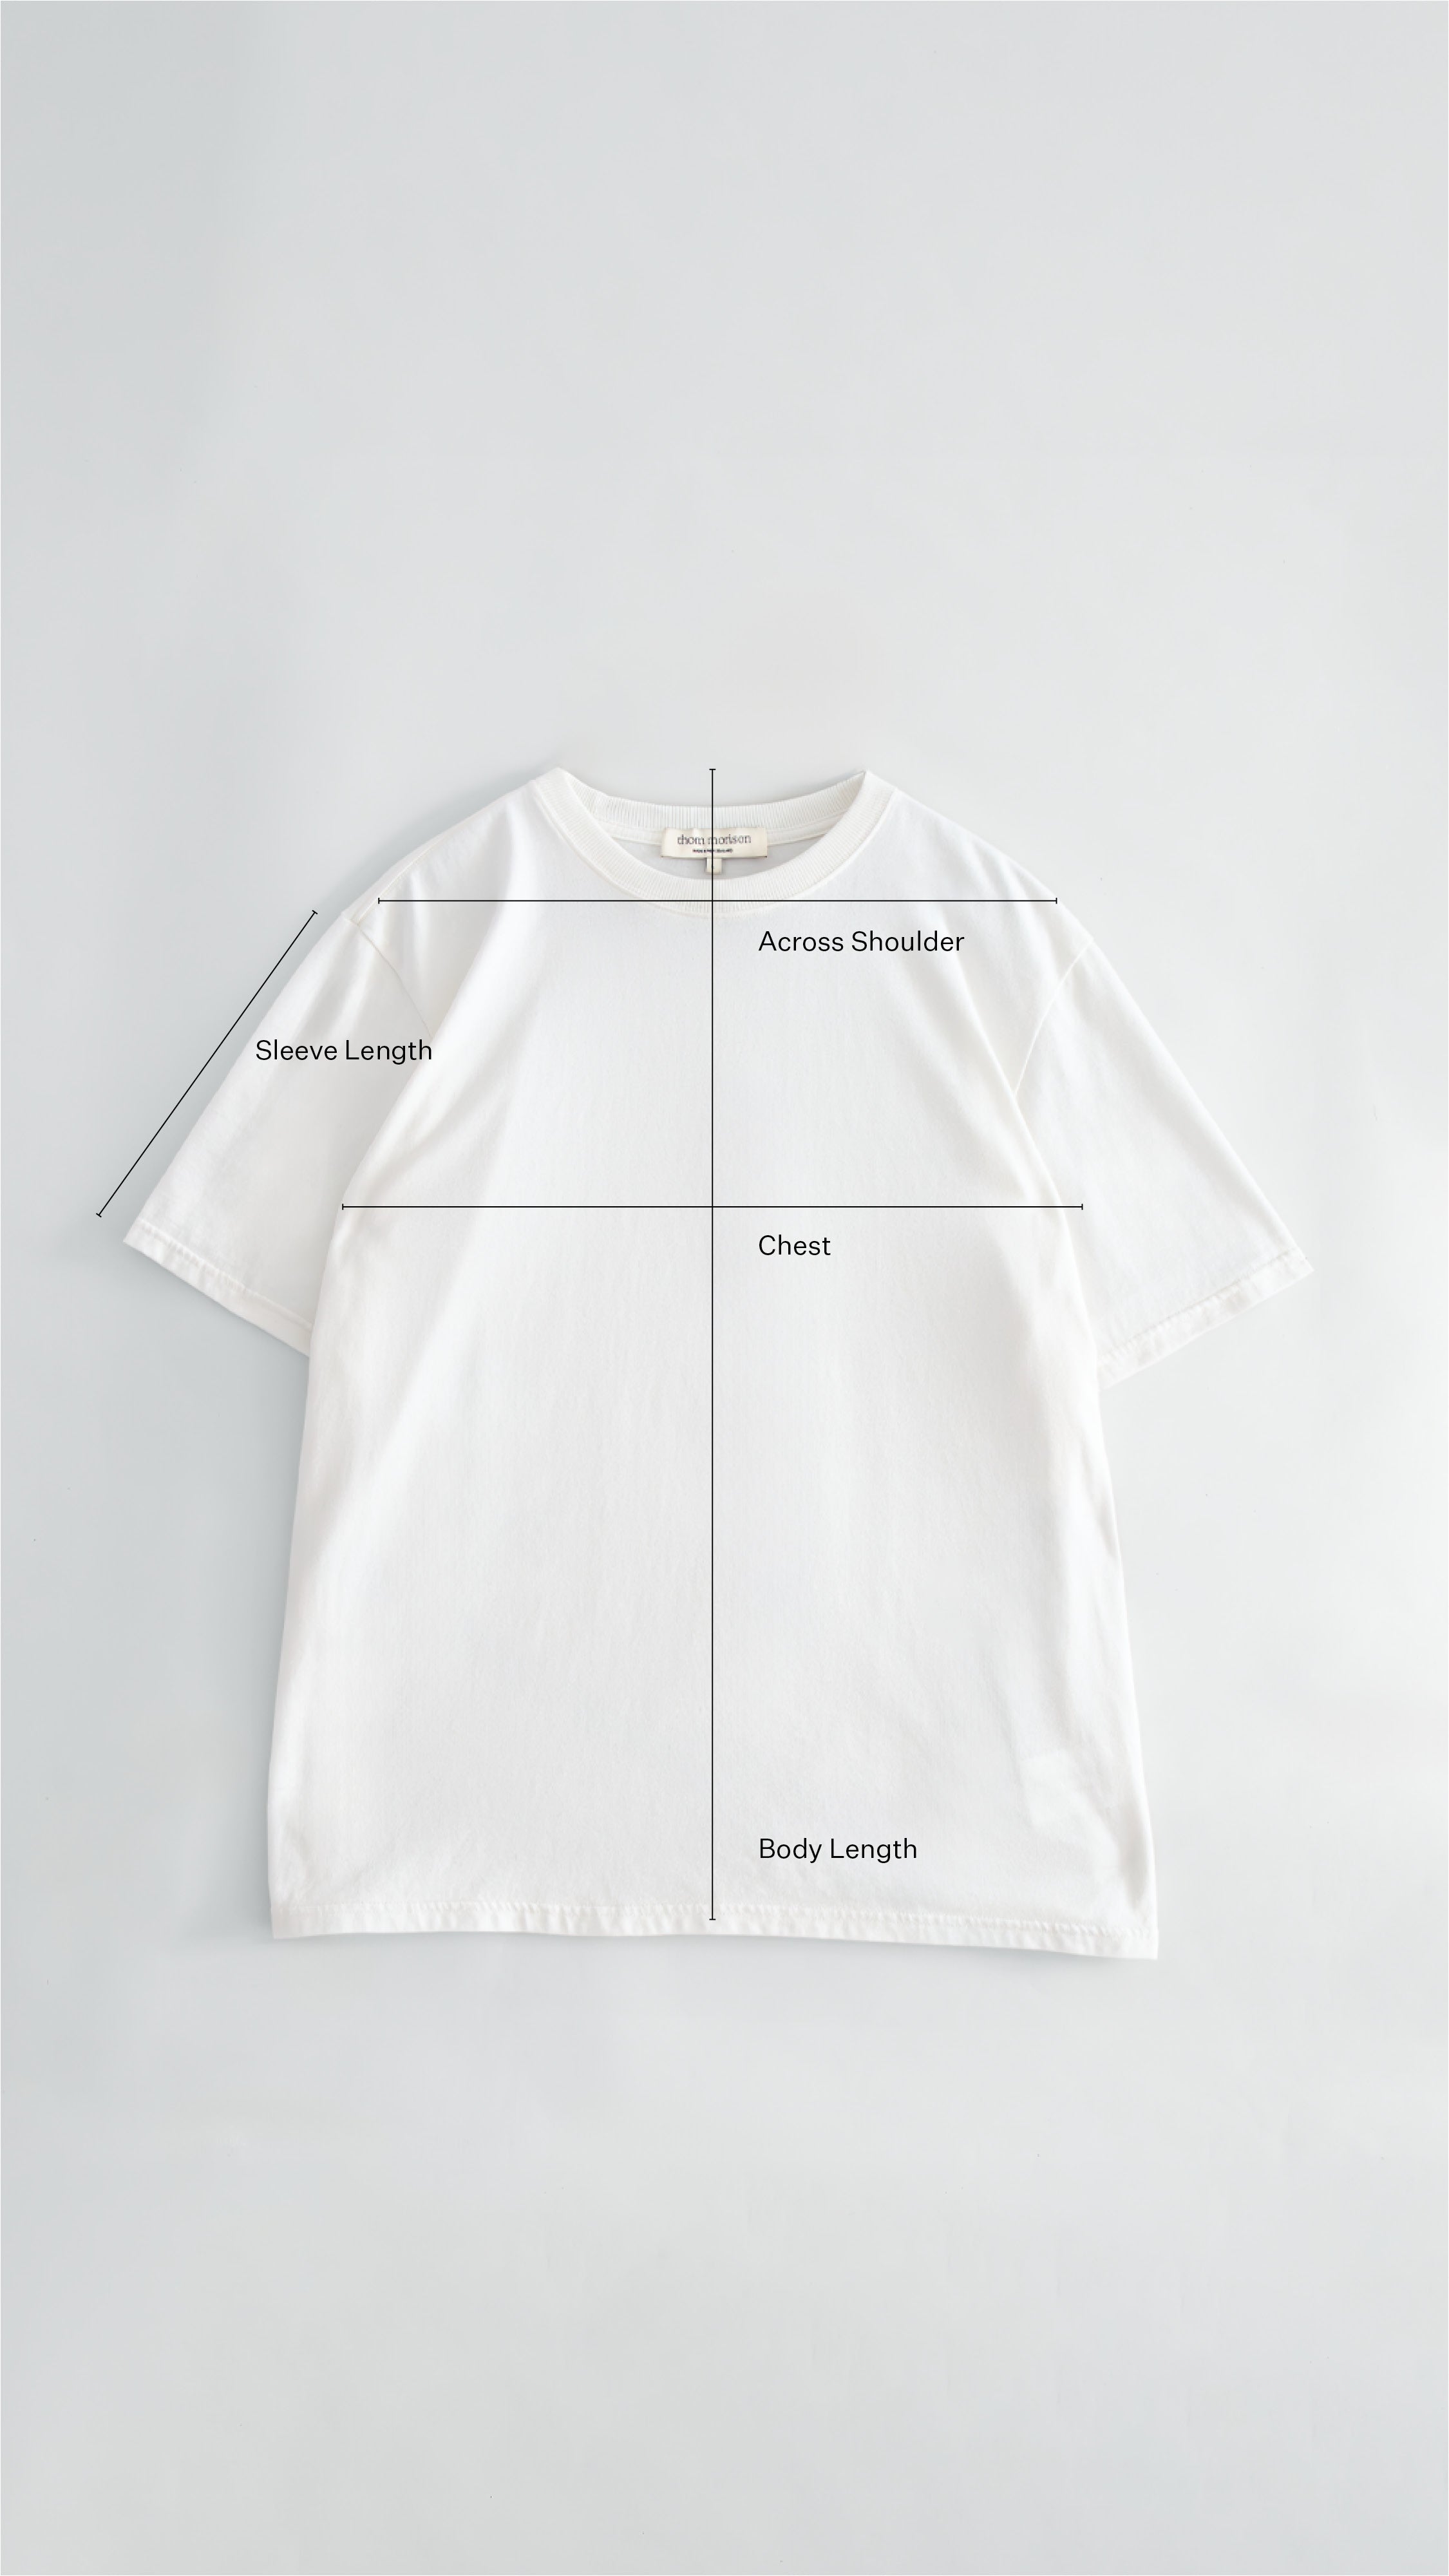 Measurement guide for relaxed t-shirt in off-white